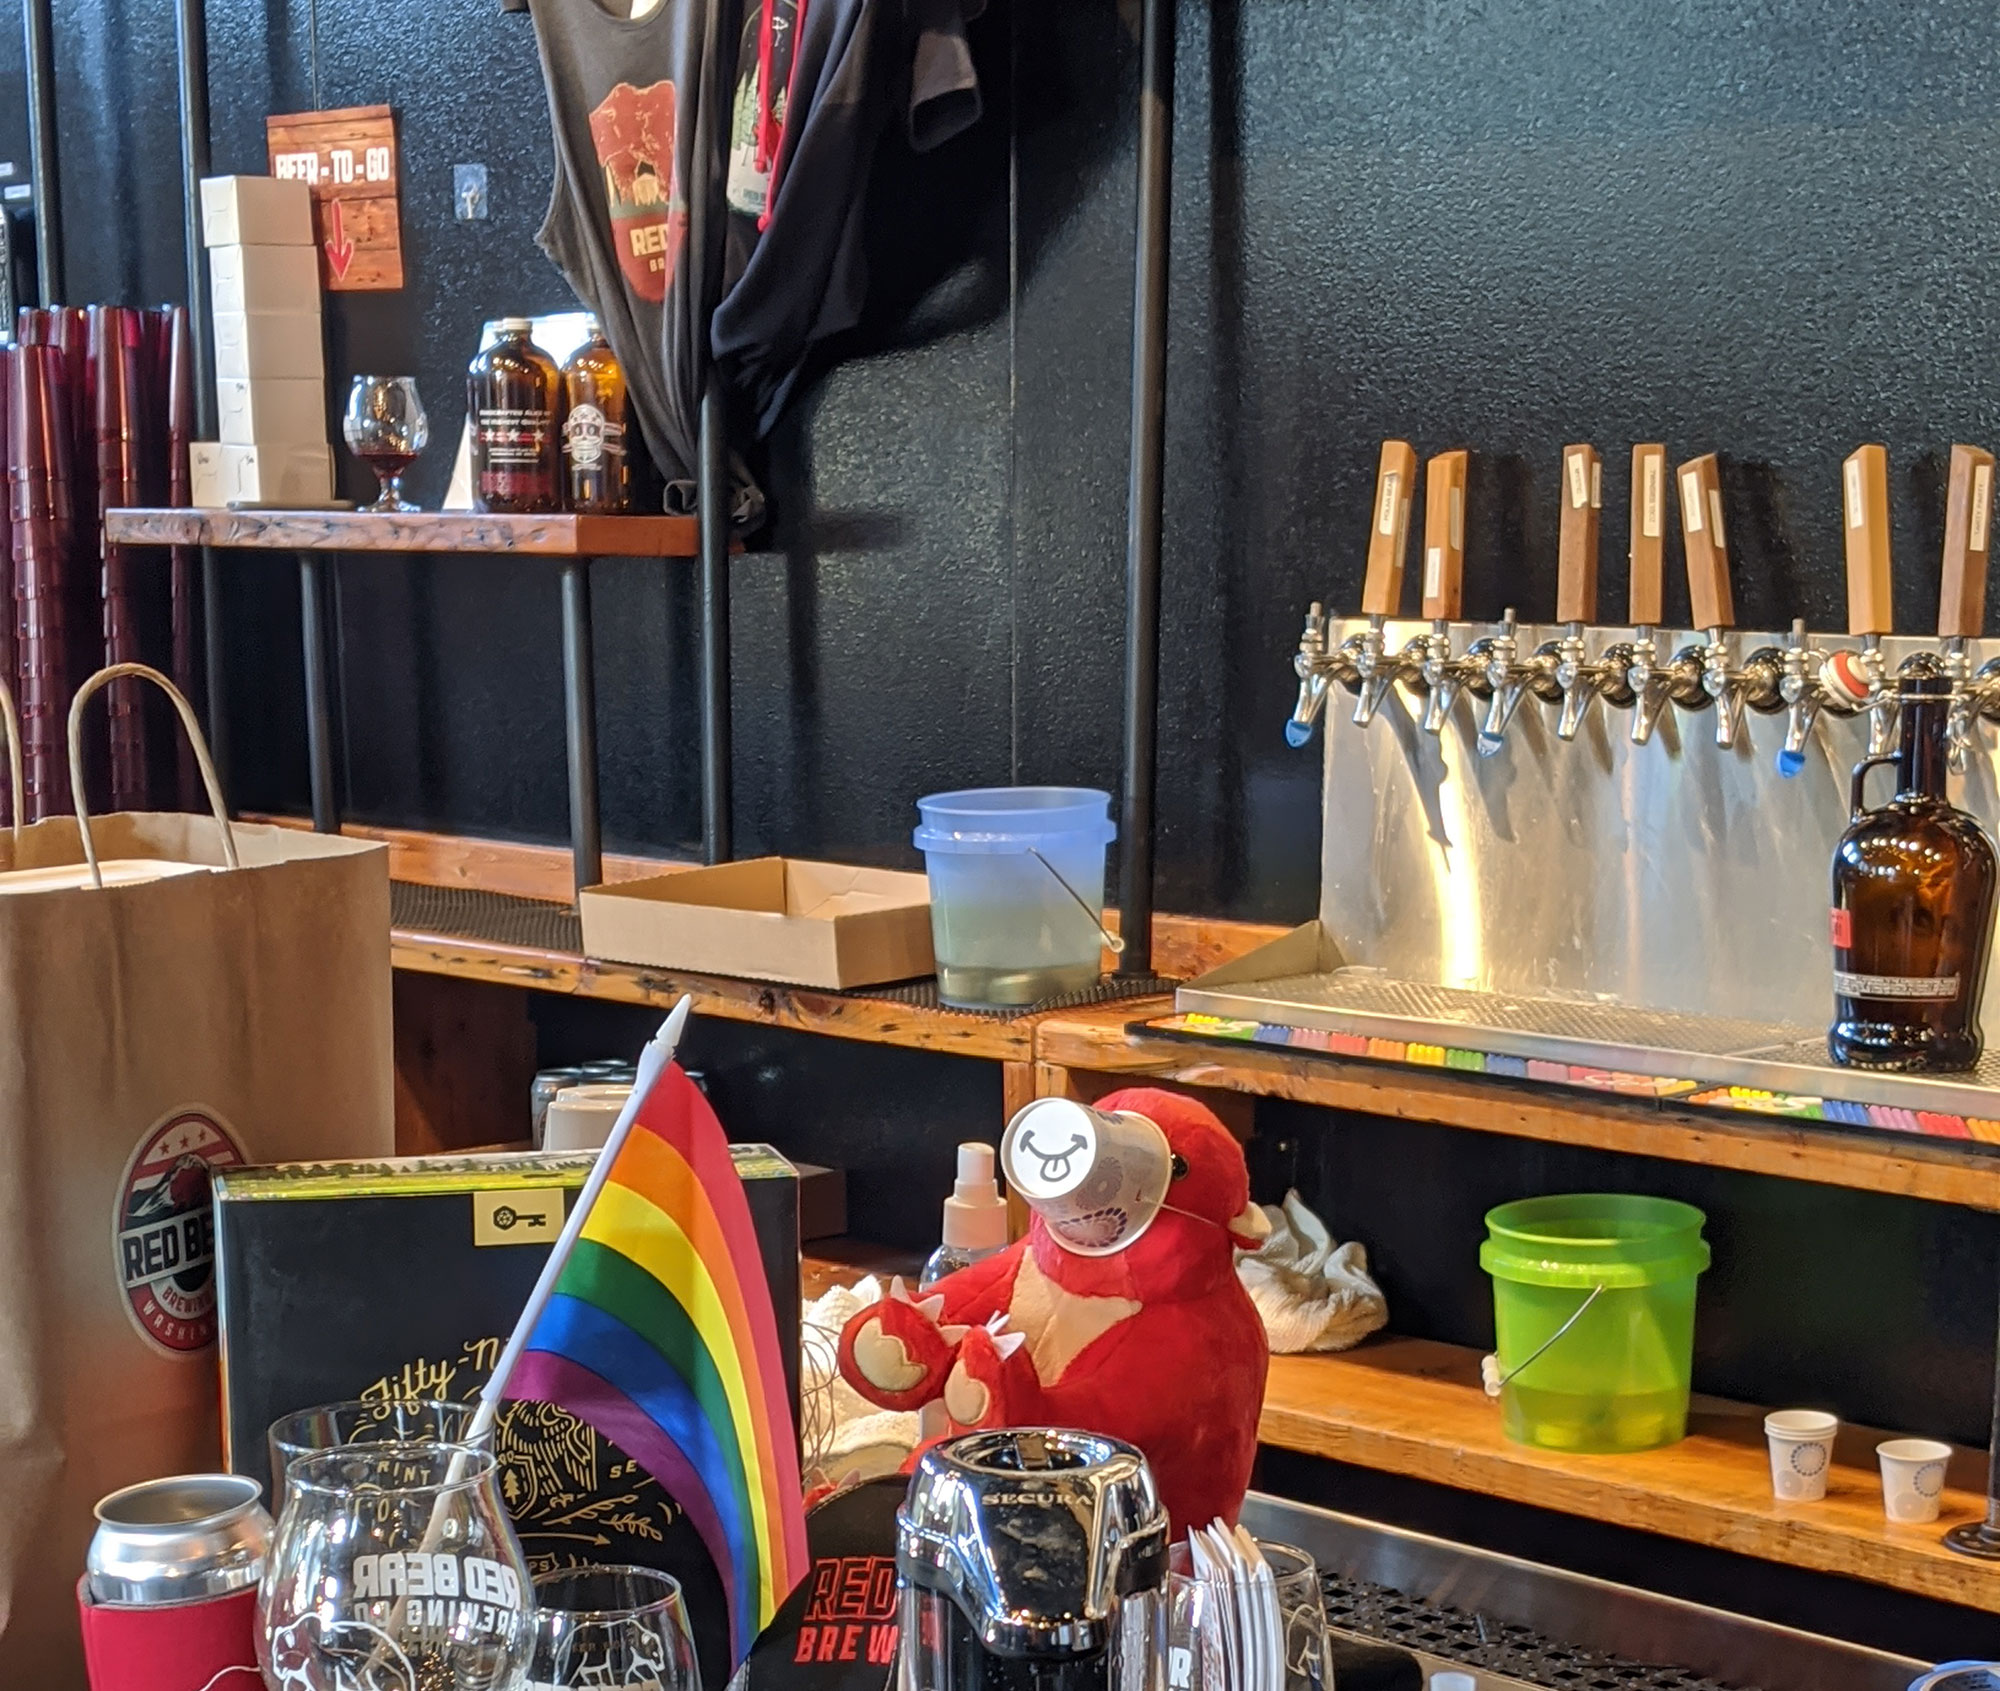 The mascot wearing a mask at Red Bear Brewing in NE DC.